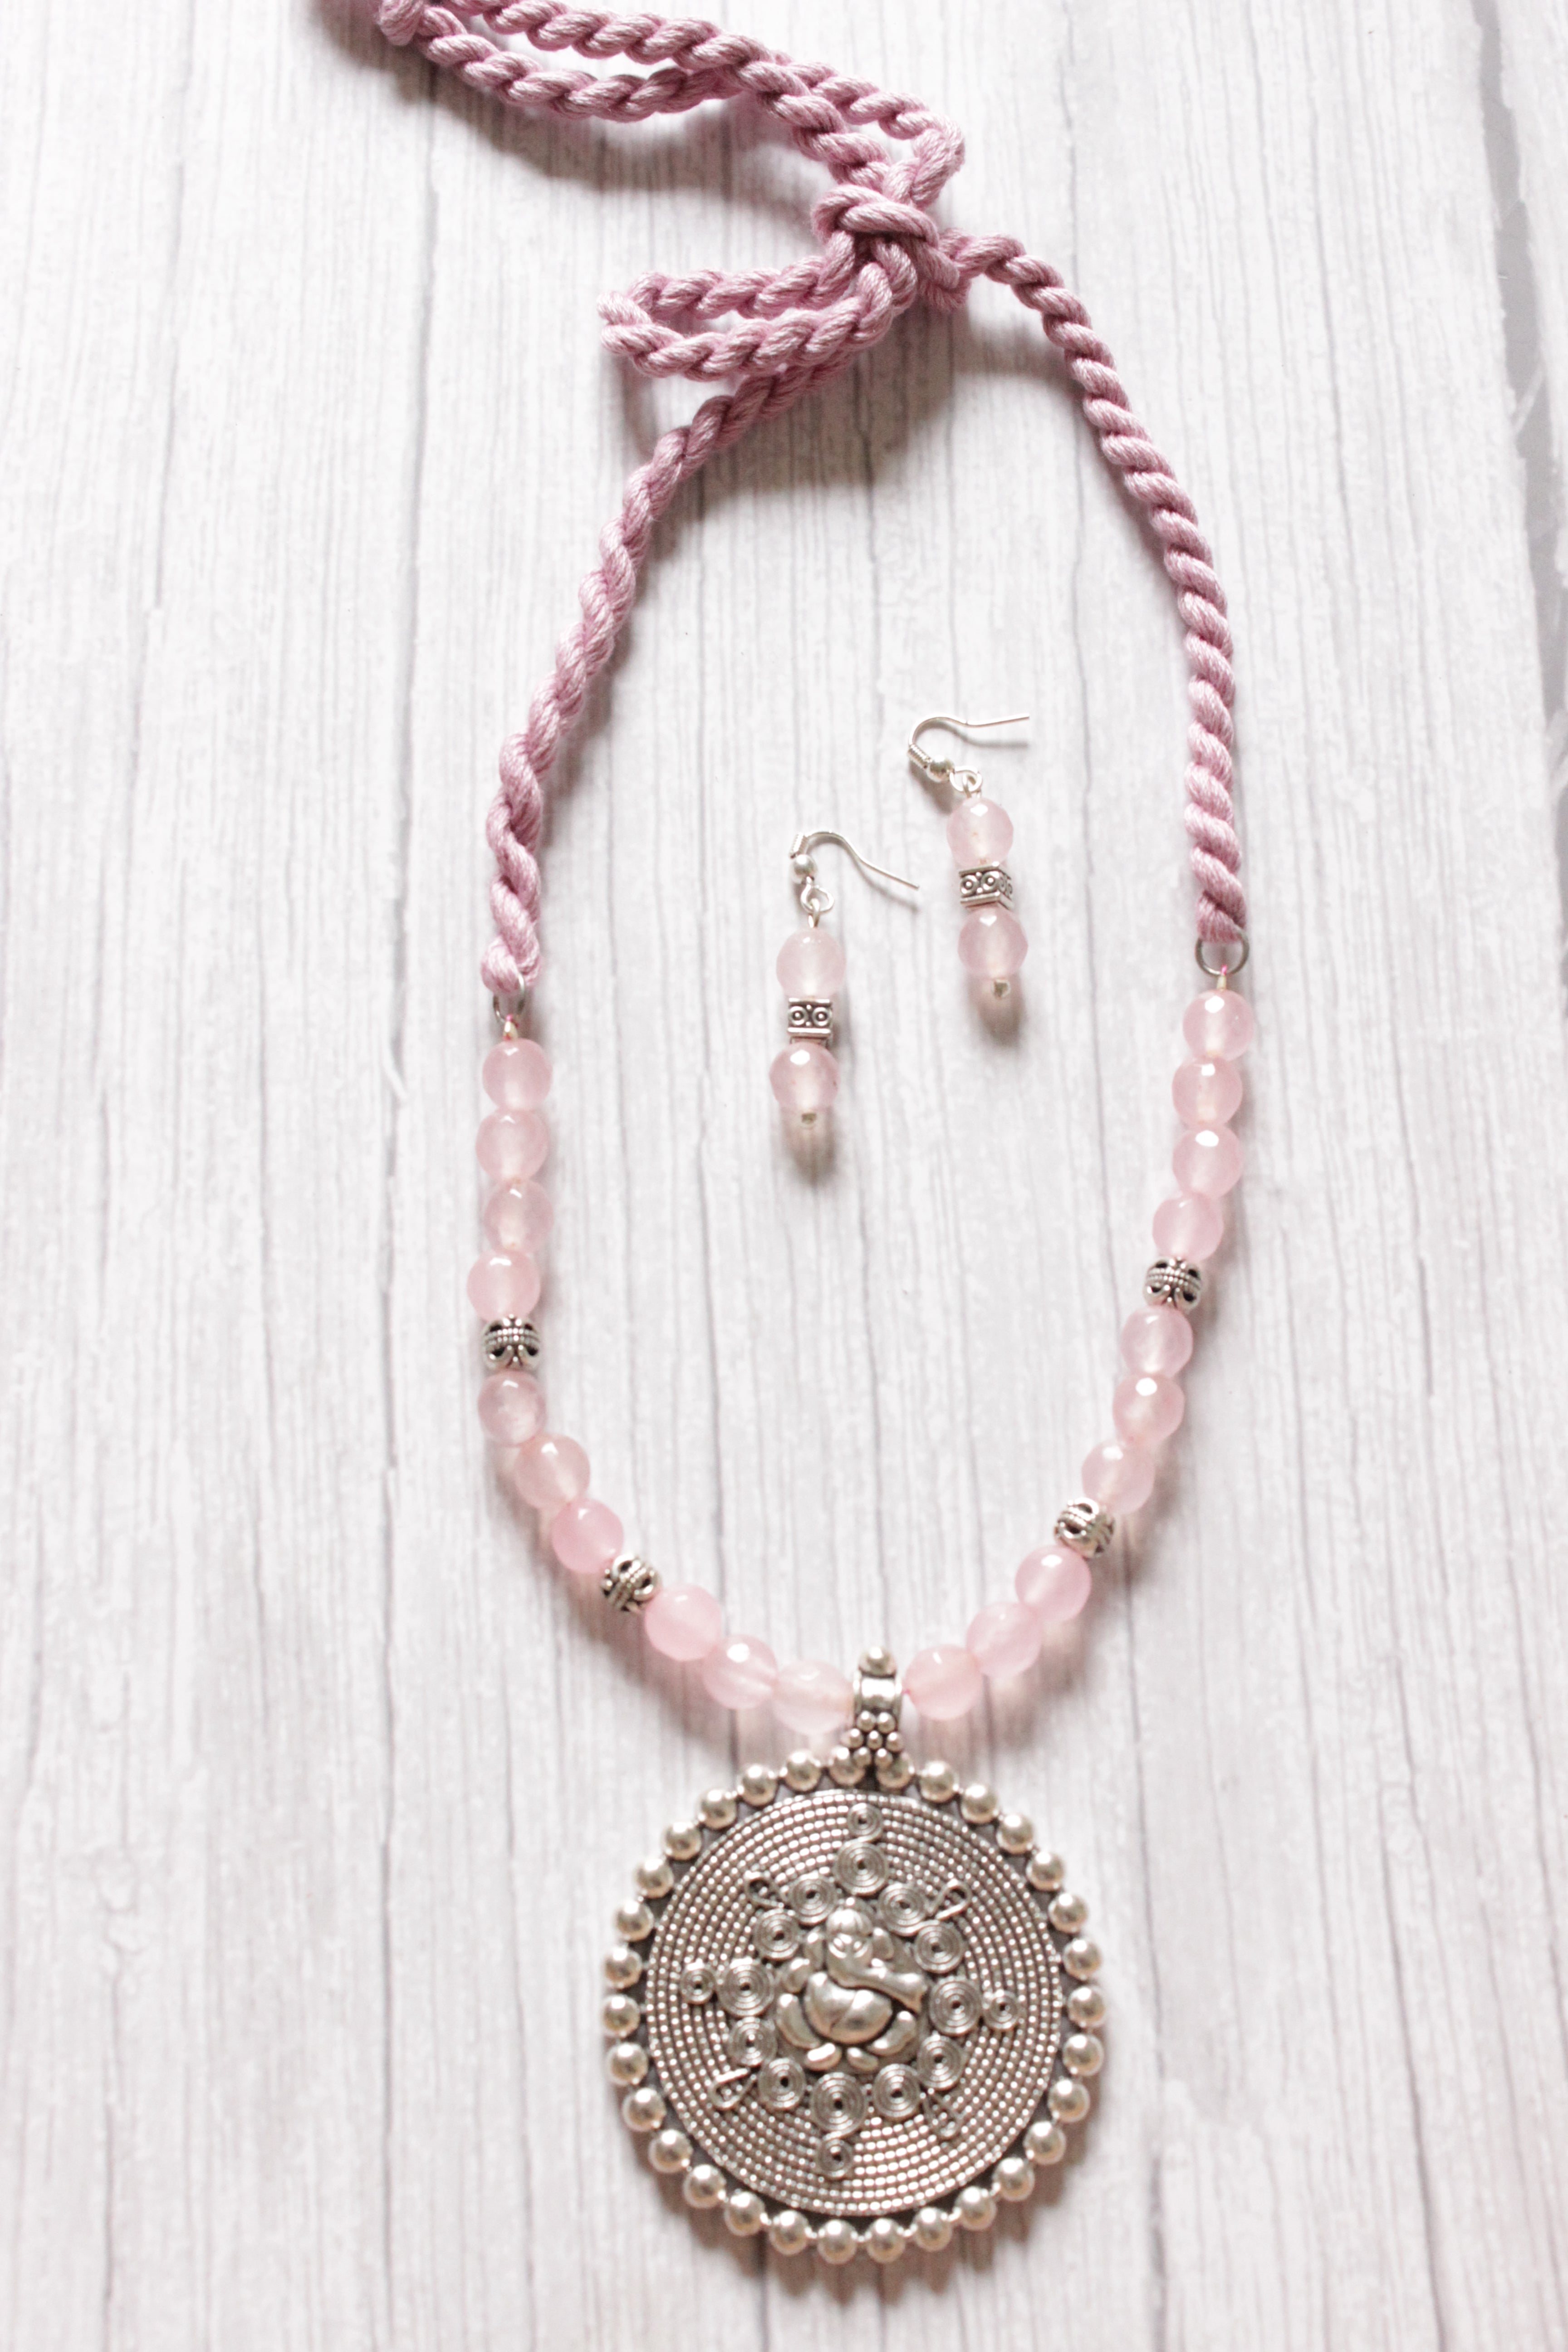 Baby Pink Jade Beads Rope Closure Necklace Set with Silver Finish Ganesha Metal Pendant